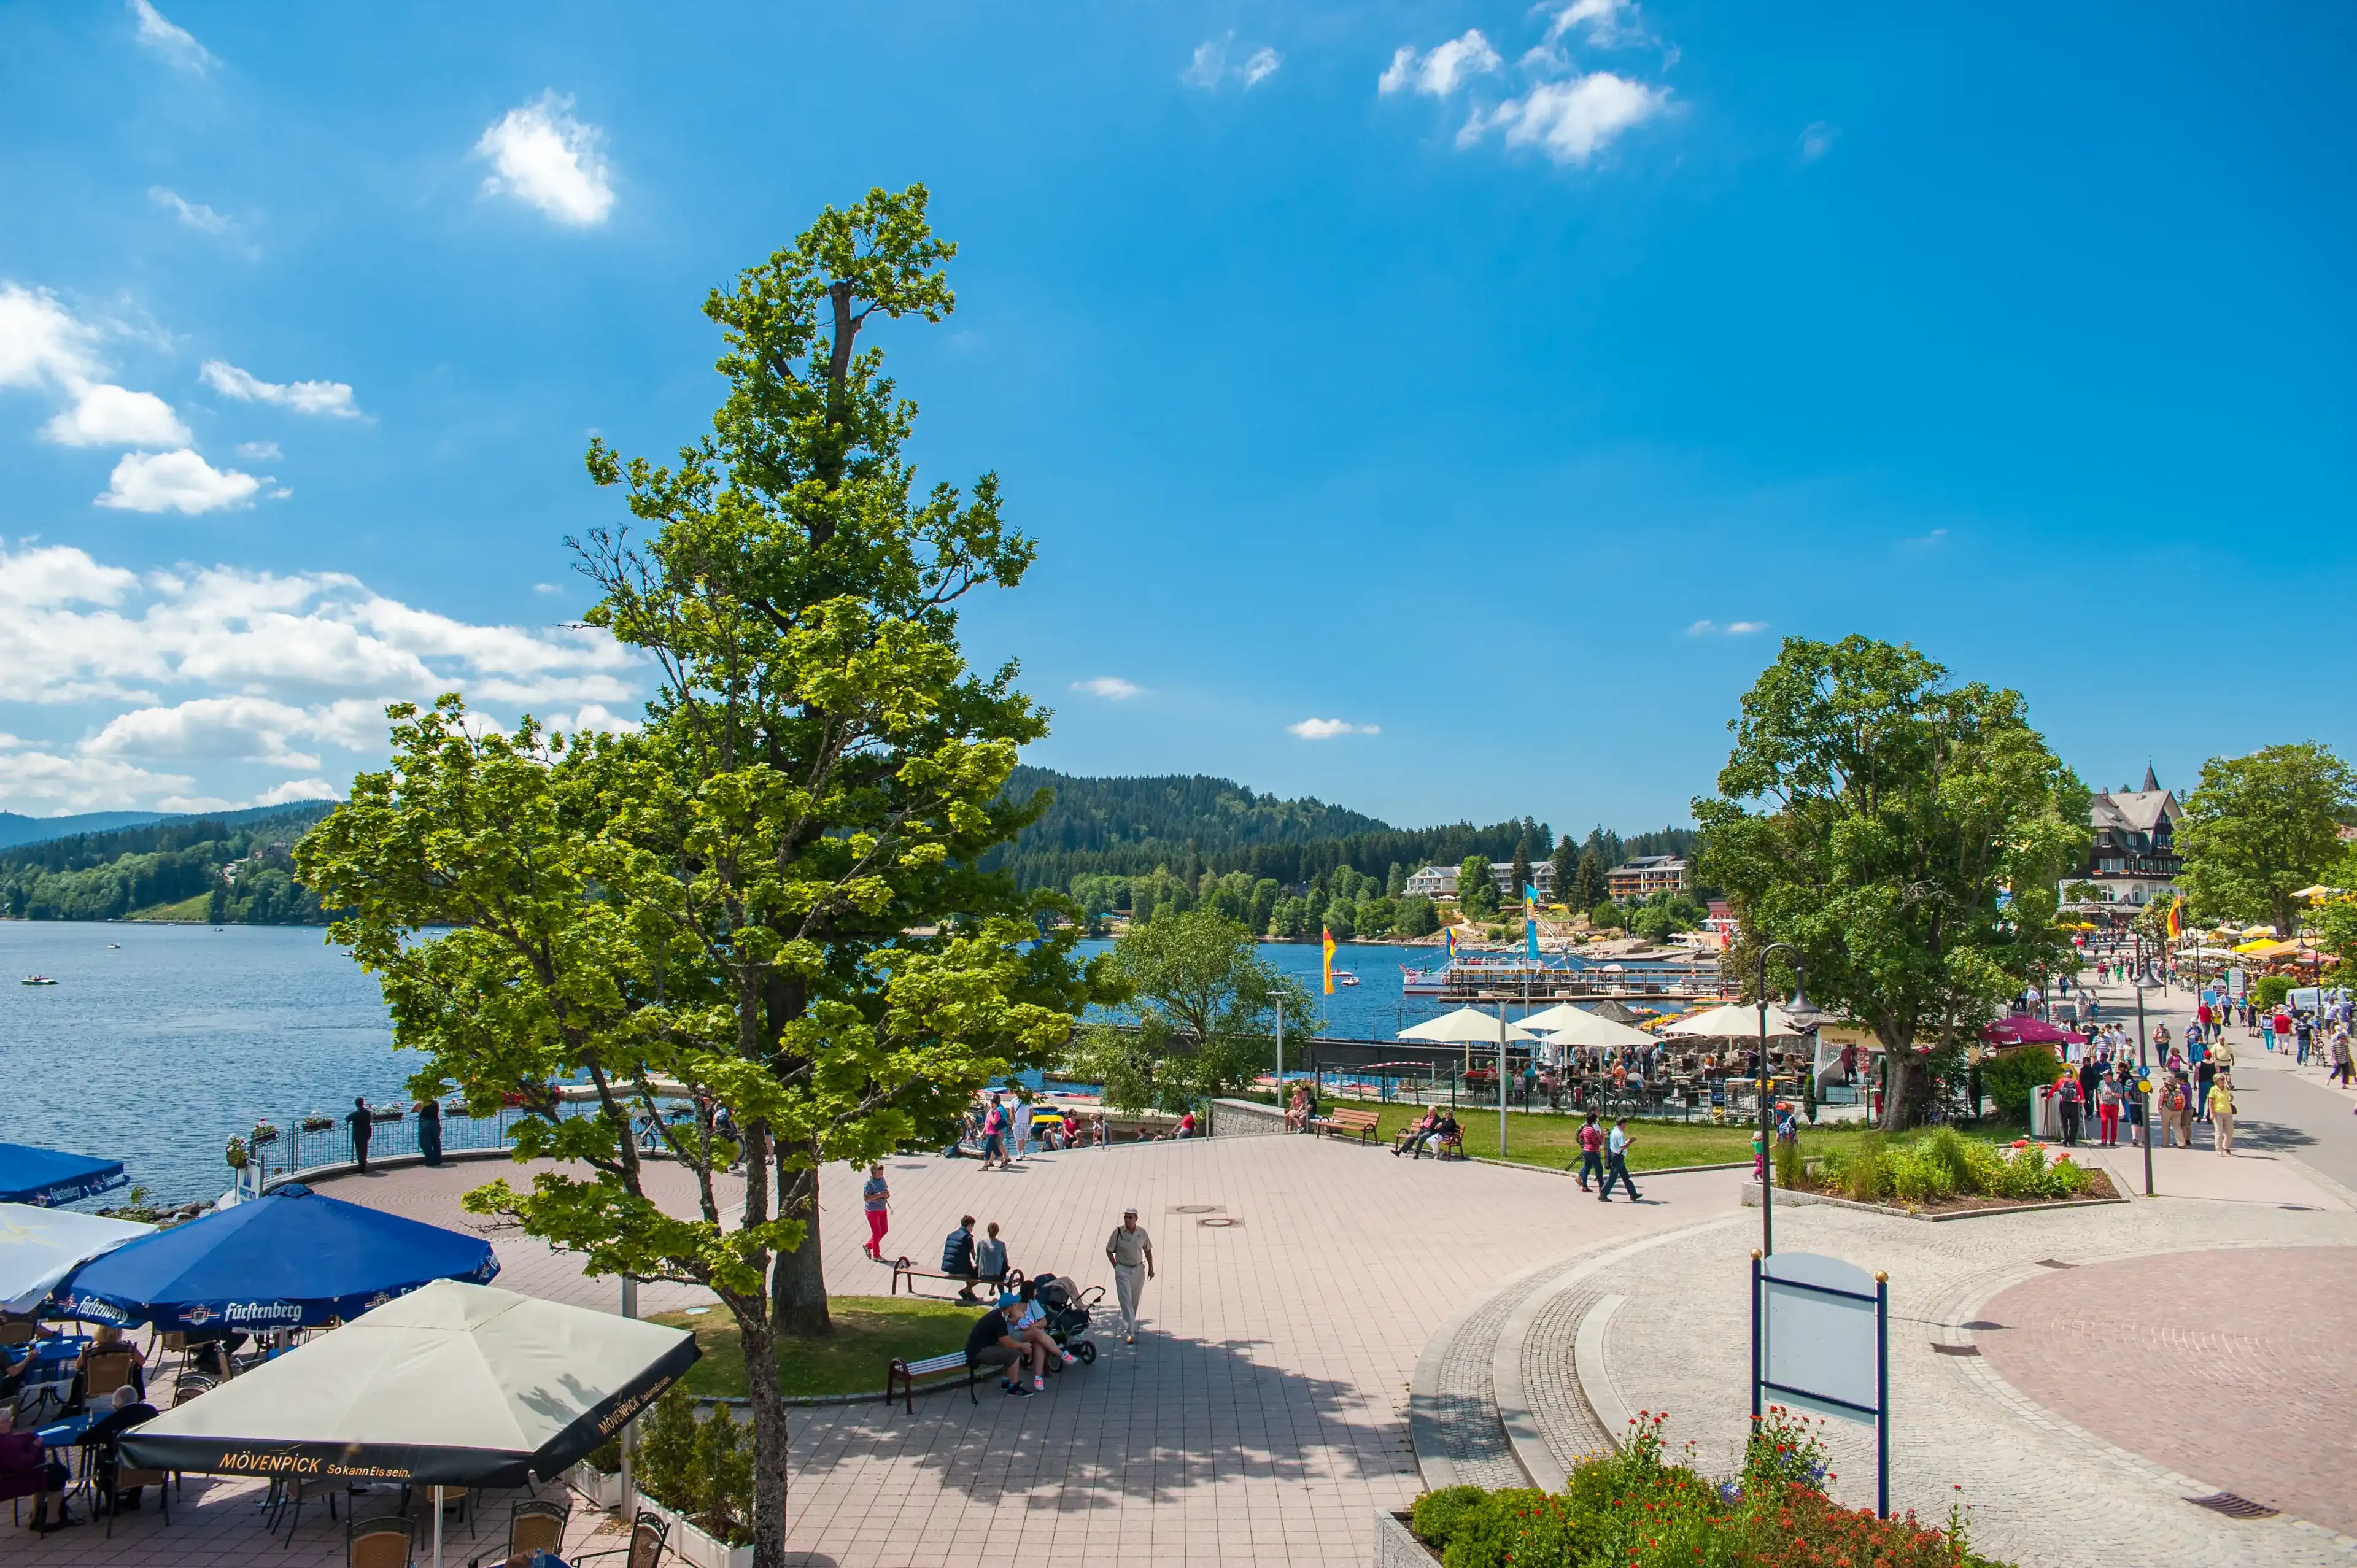 Best Titisee-Neustadt hotels. Cheap hotels in Titisee-Neustadt, Germany